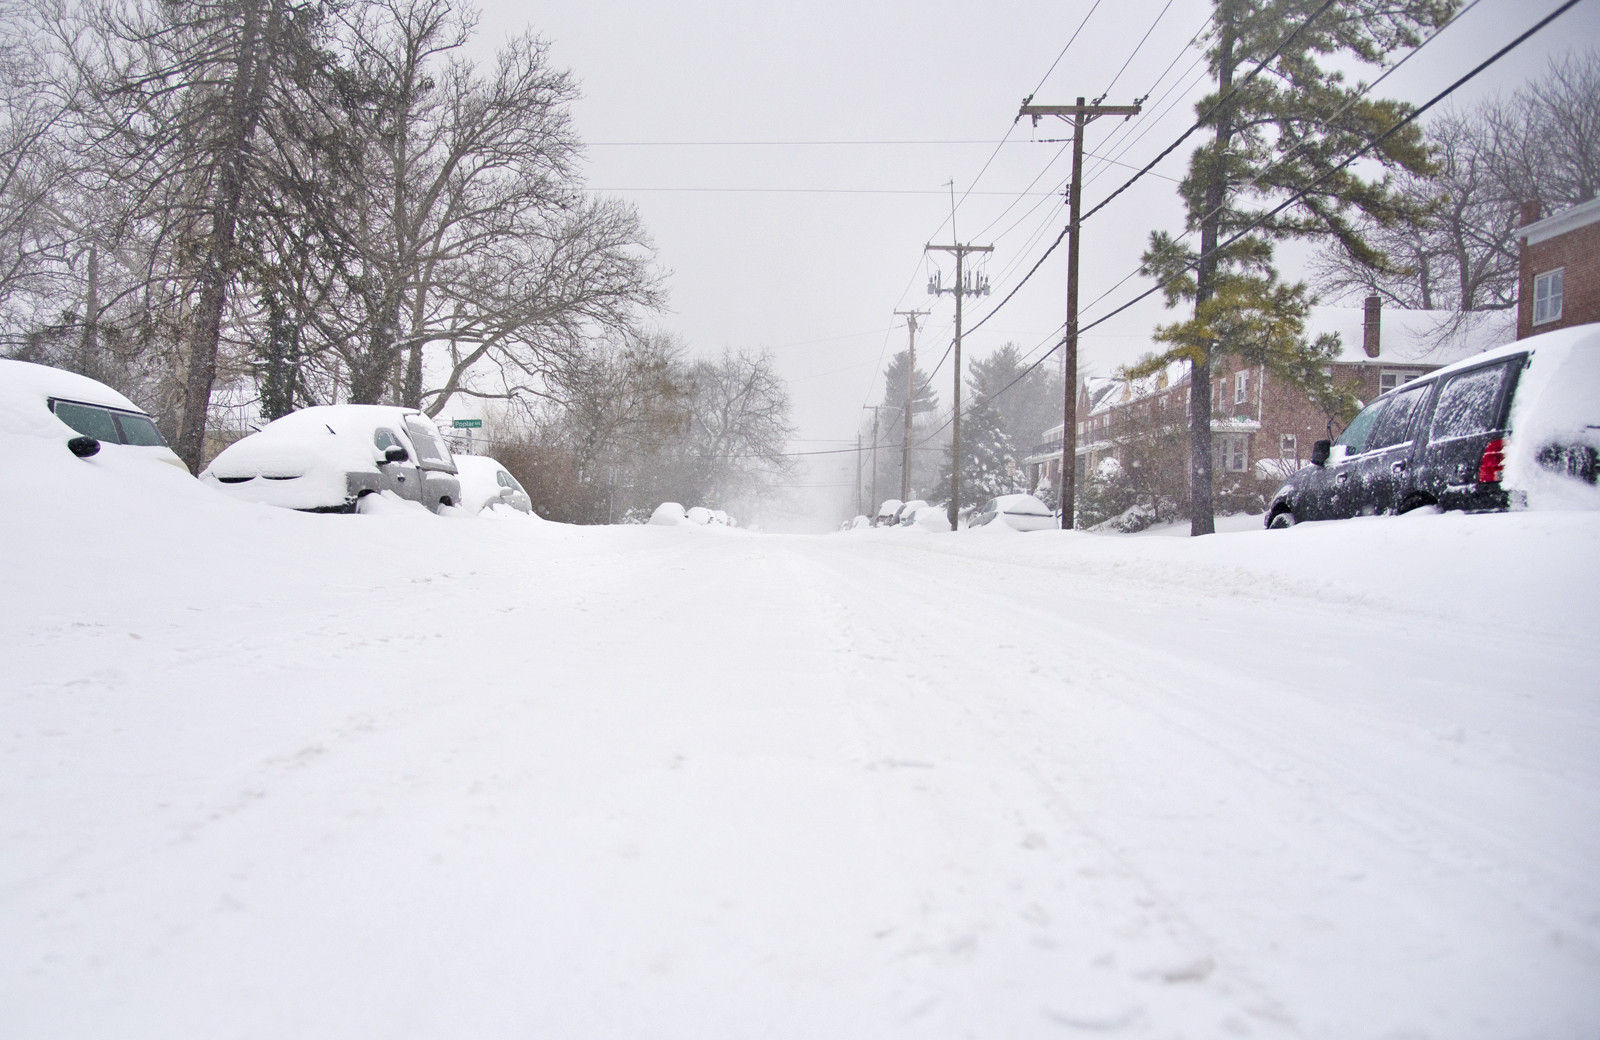 Frederick Road on Saturday morning during the blizzard - Capital Gazette